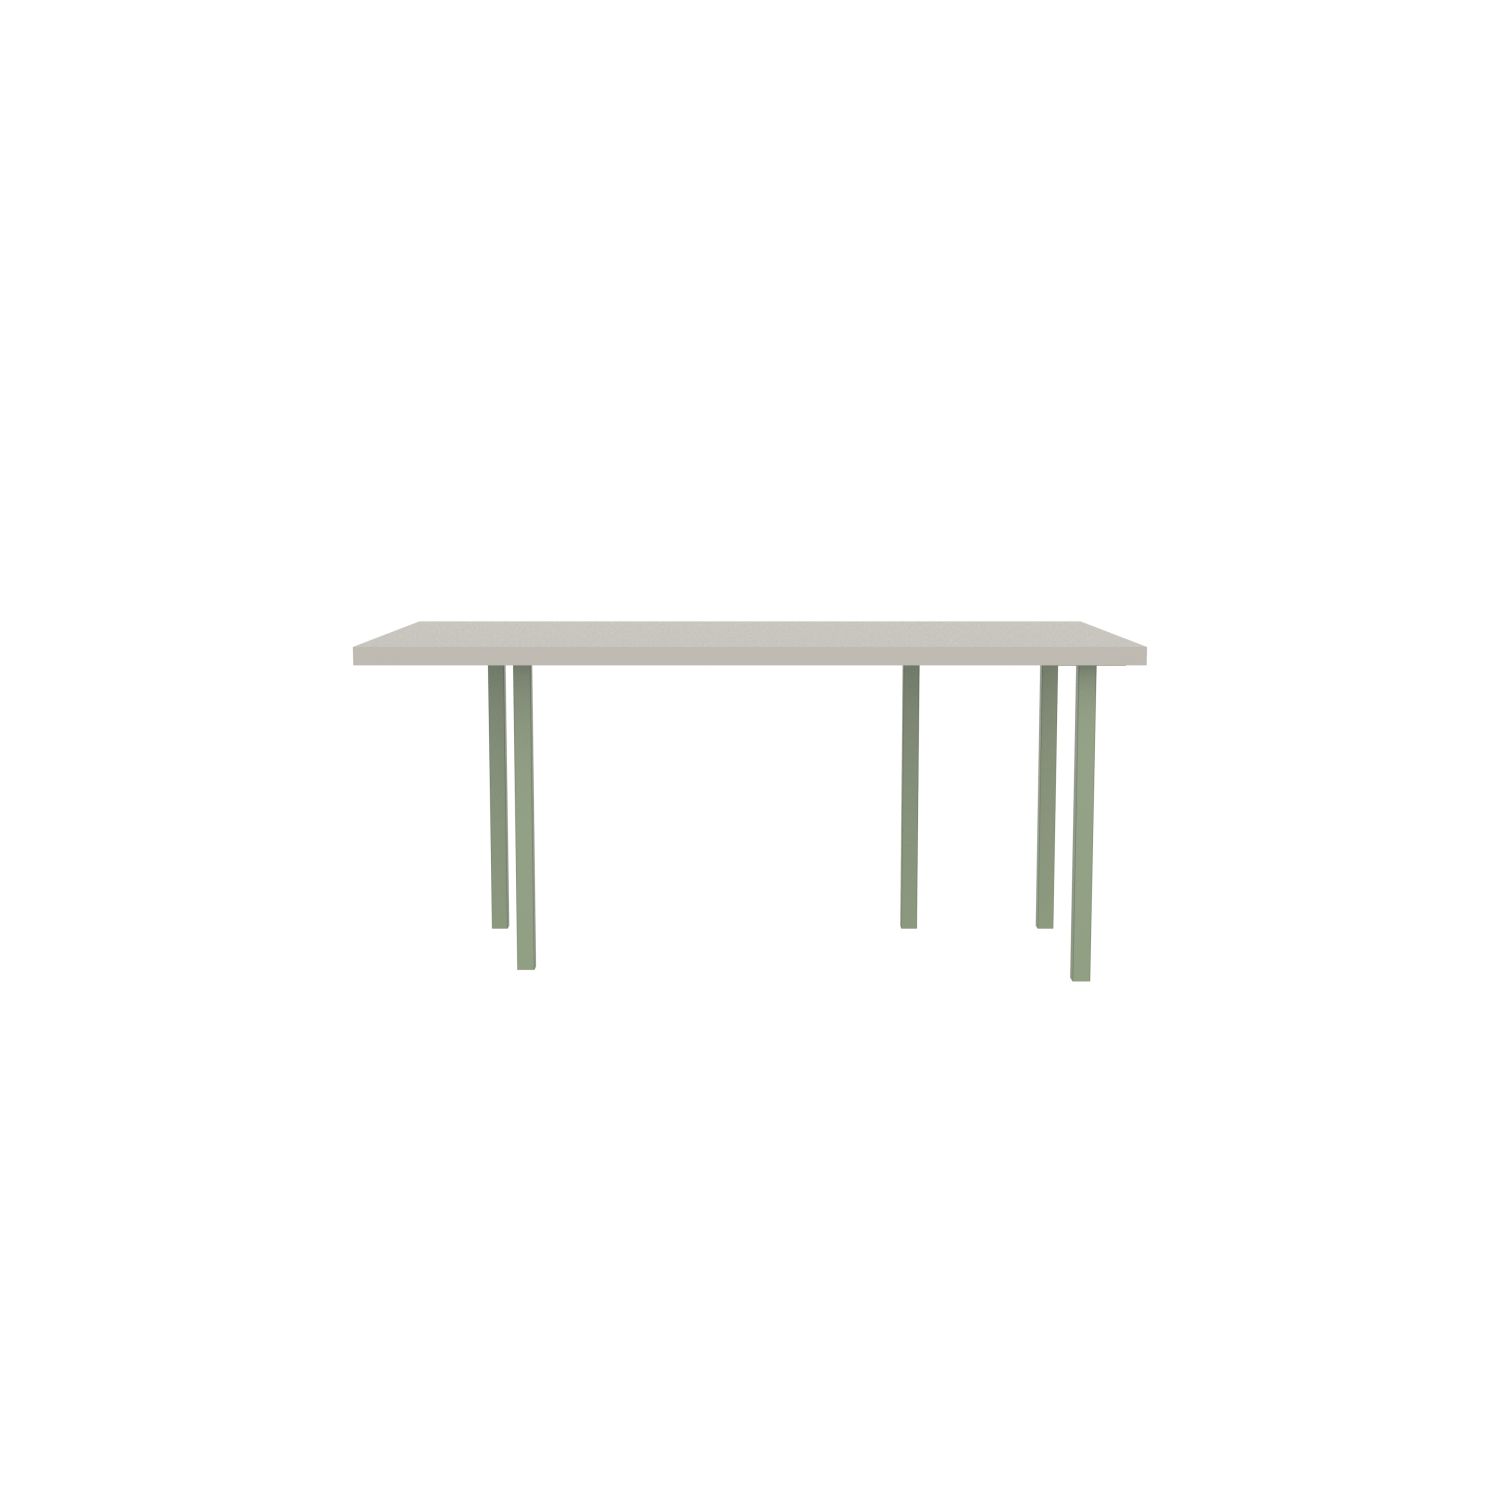 lensvelt bbrand table five fixed heigt 915x172 hpl white 50 mm price level 1 green ral6021